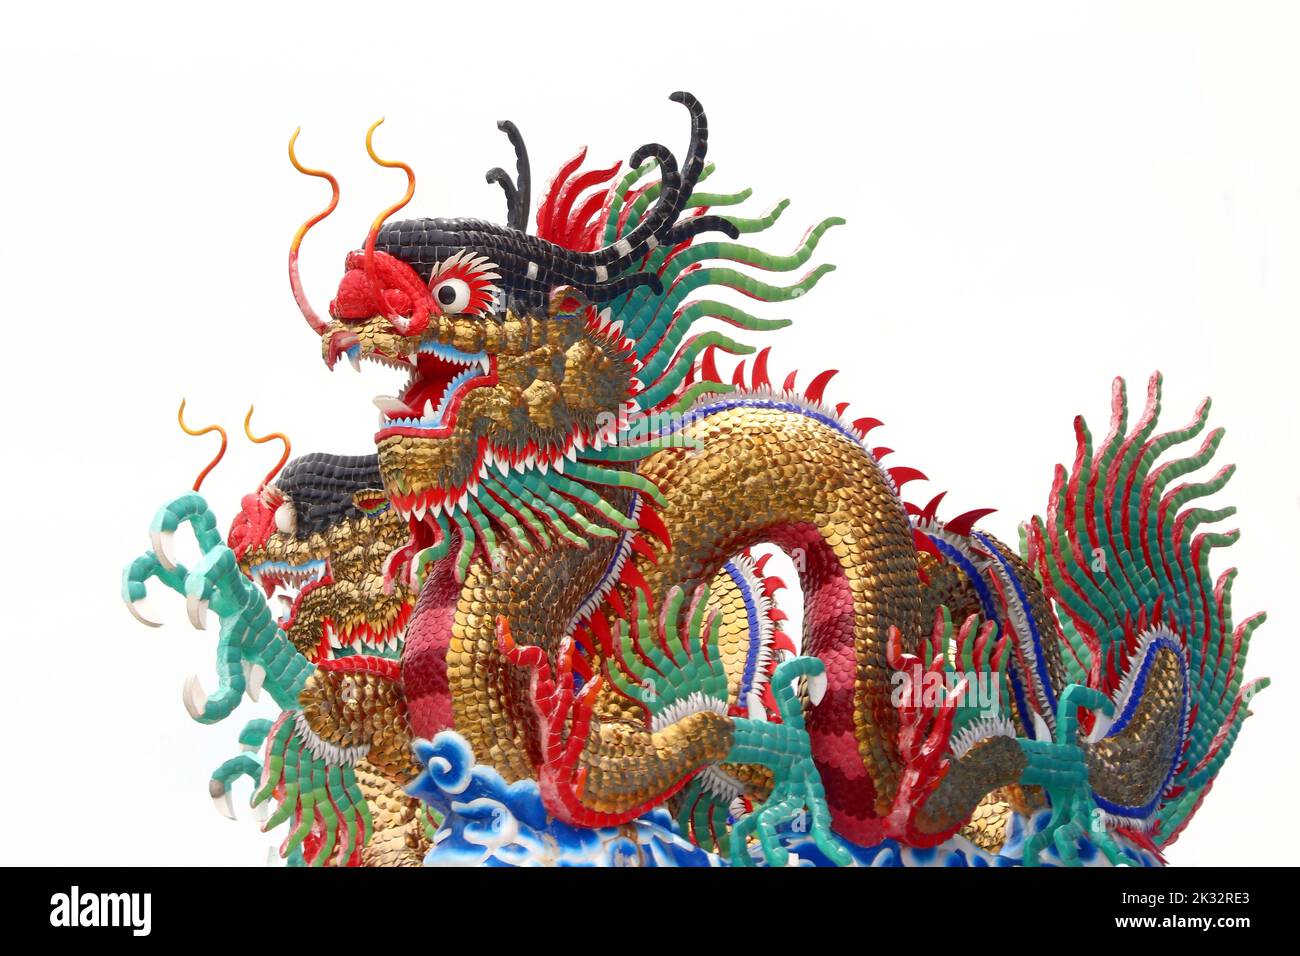 dragon statue in chinese temple isolated on white background Stock Photo